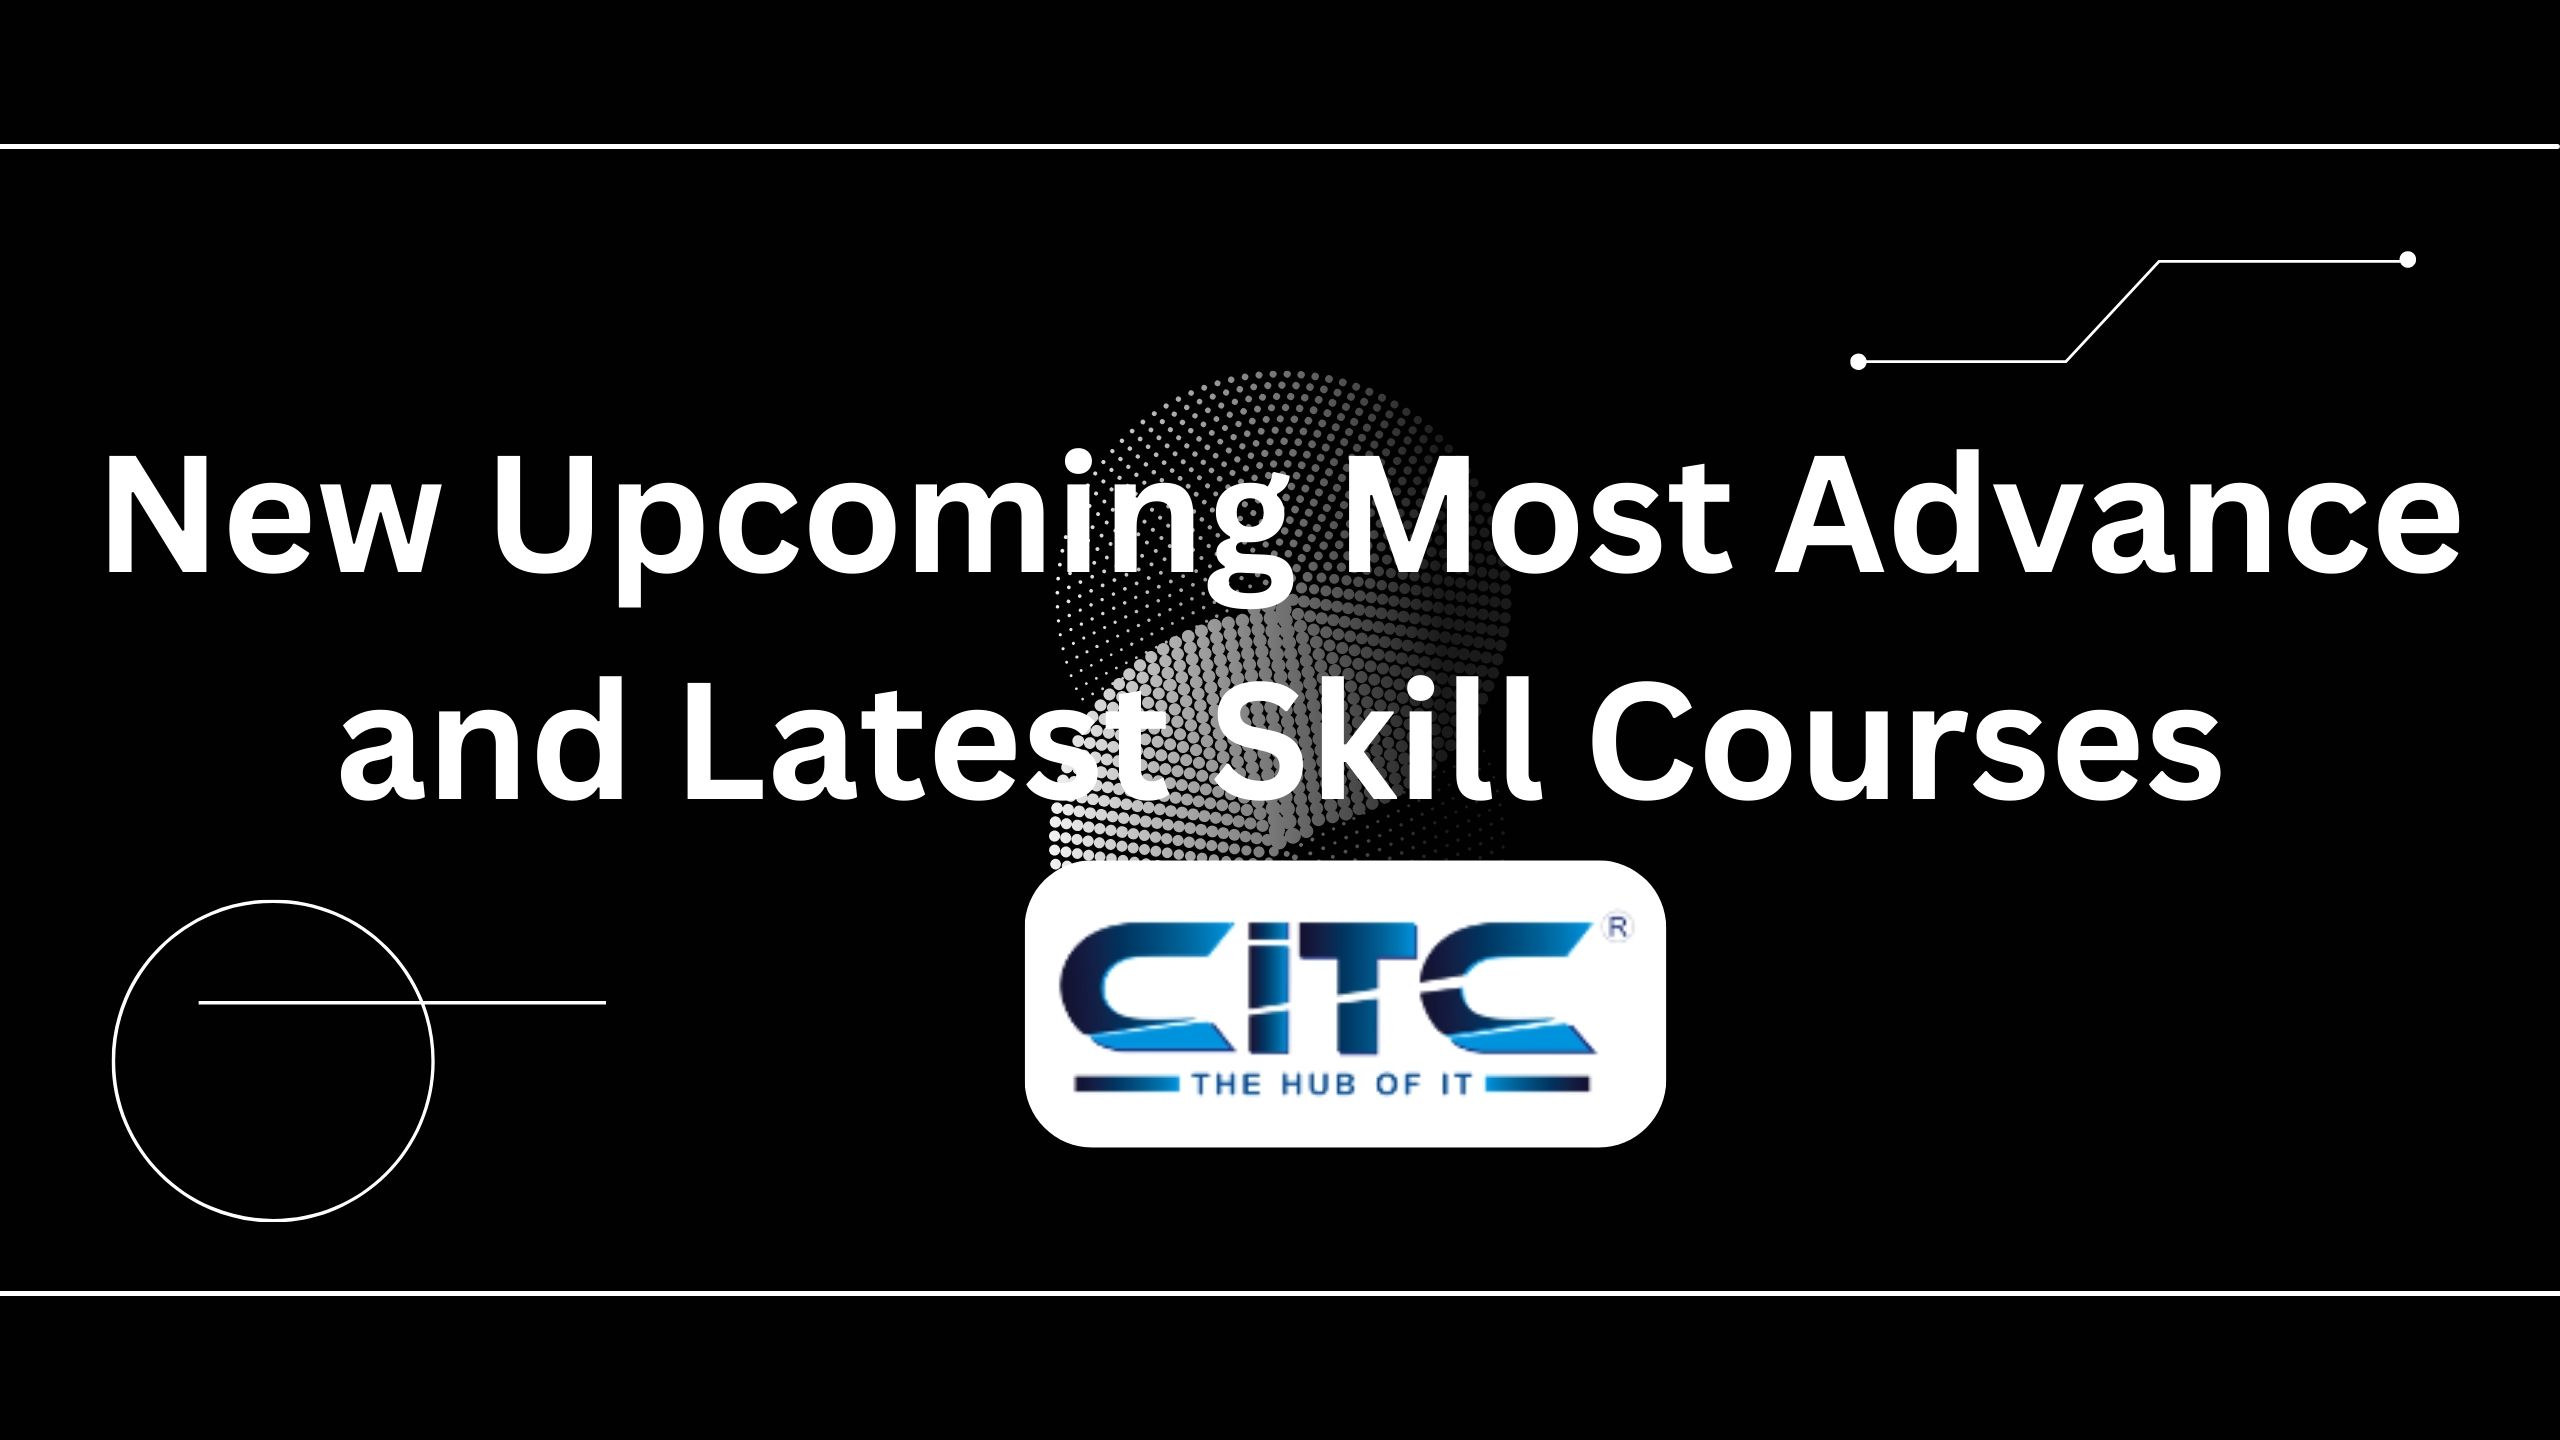 New Upcoming Most Advanced and Latest Skill Course in CITC